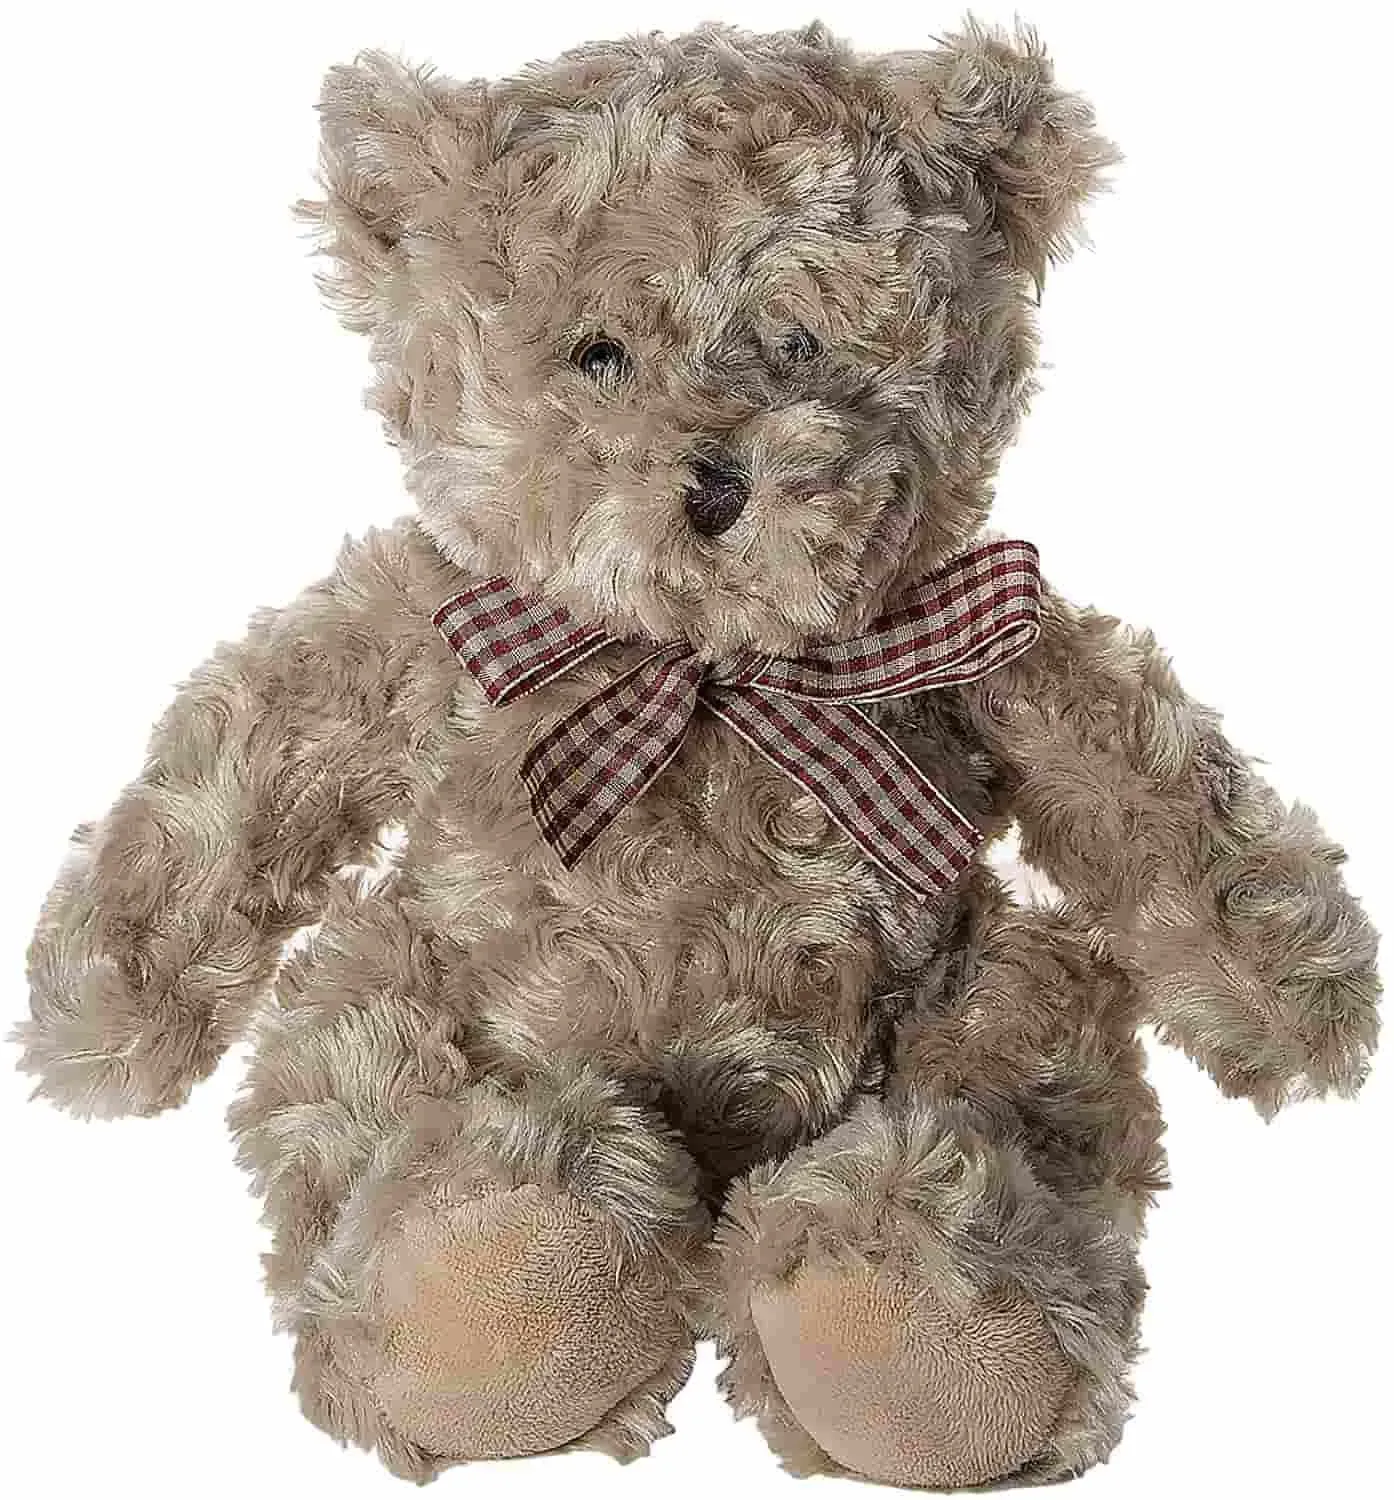 Very cute and affordable stuffed bear is washable and safe for babies.